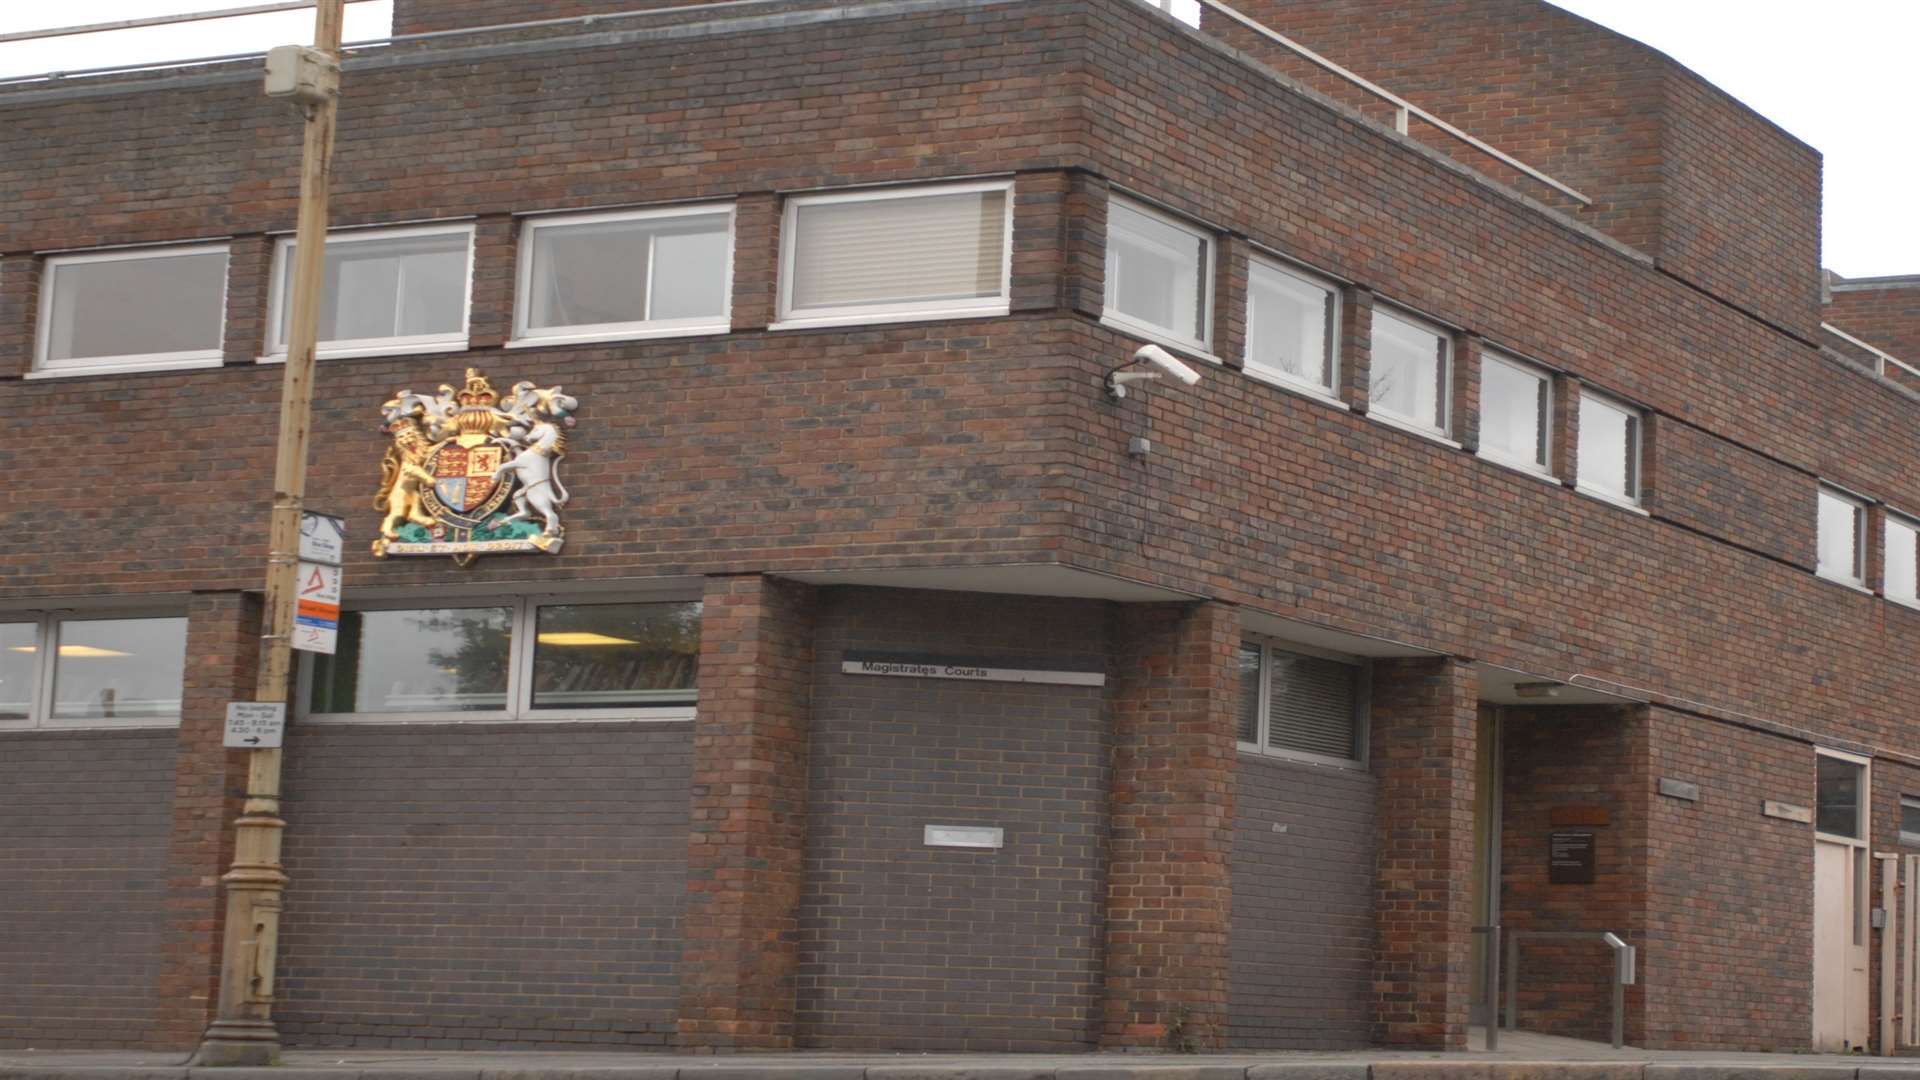 The order was granted at Canterbury Magistrates' Court